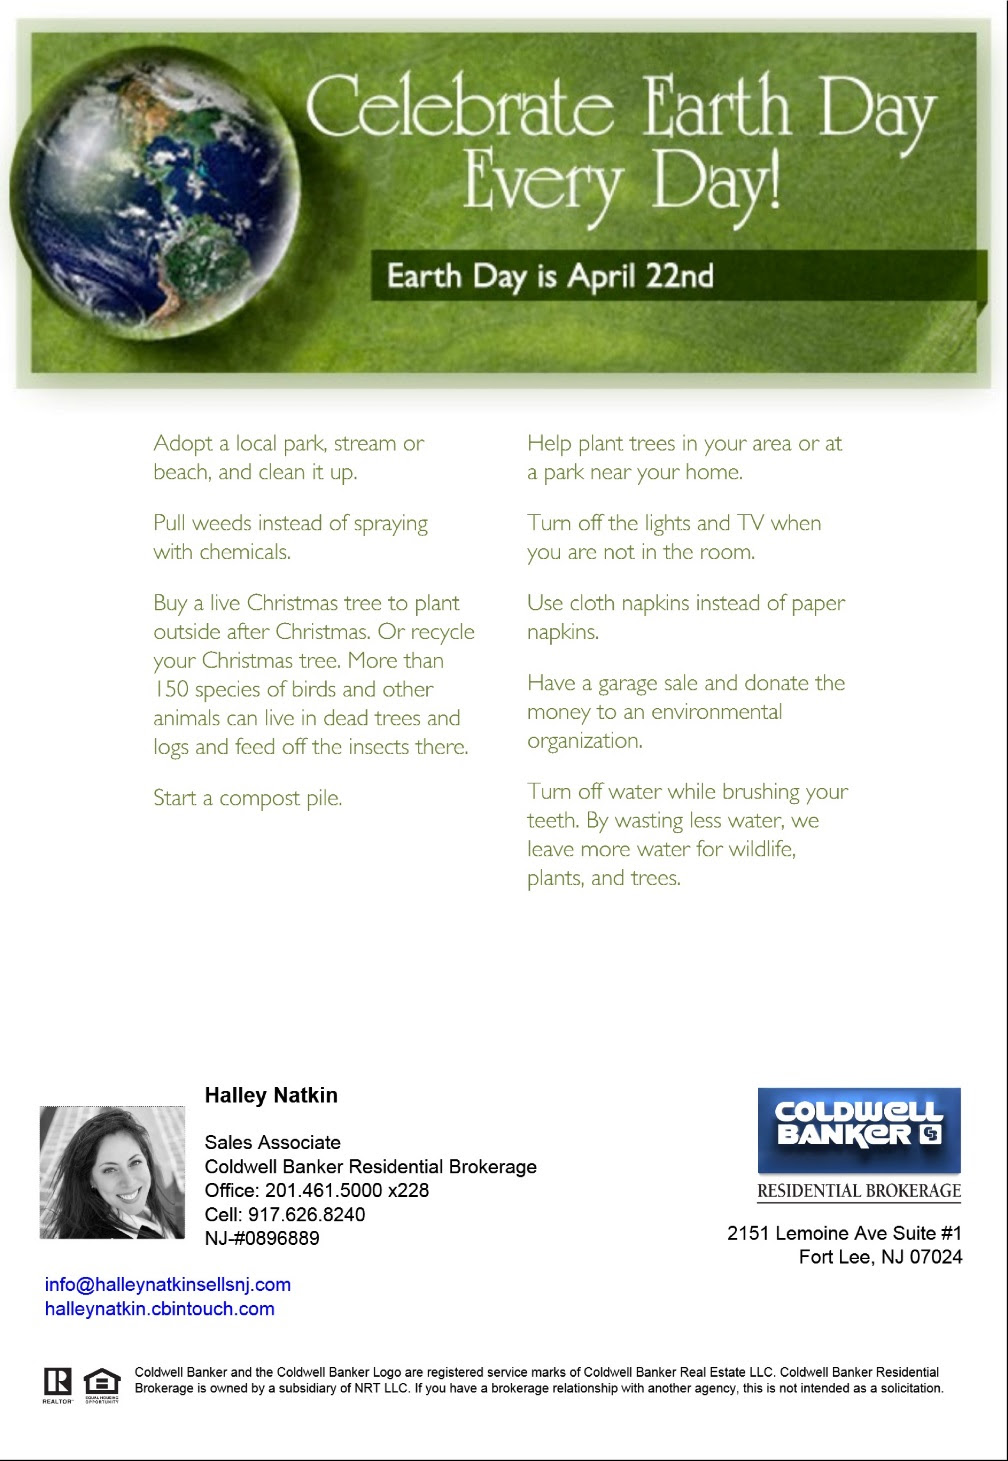 Celebrate Earth Day every day!